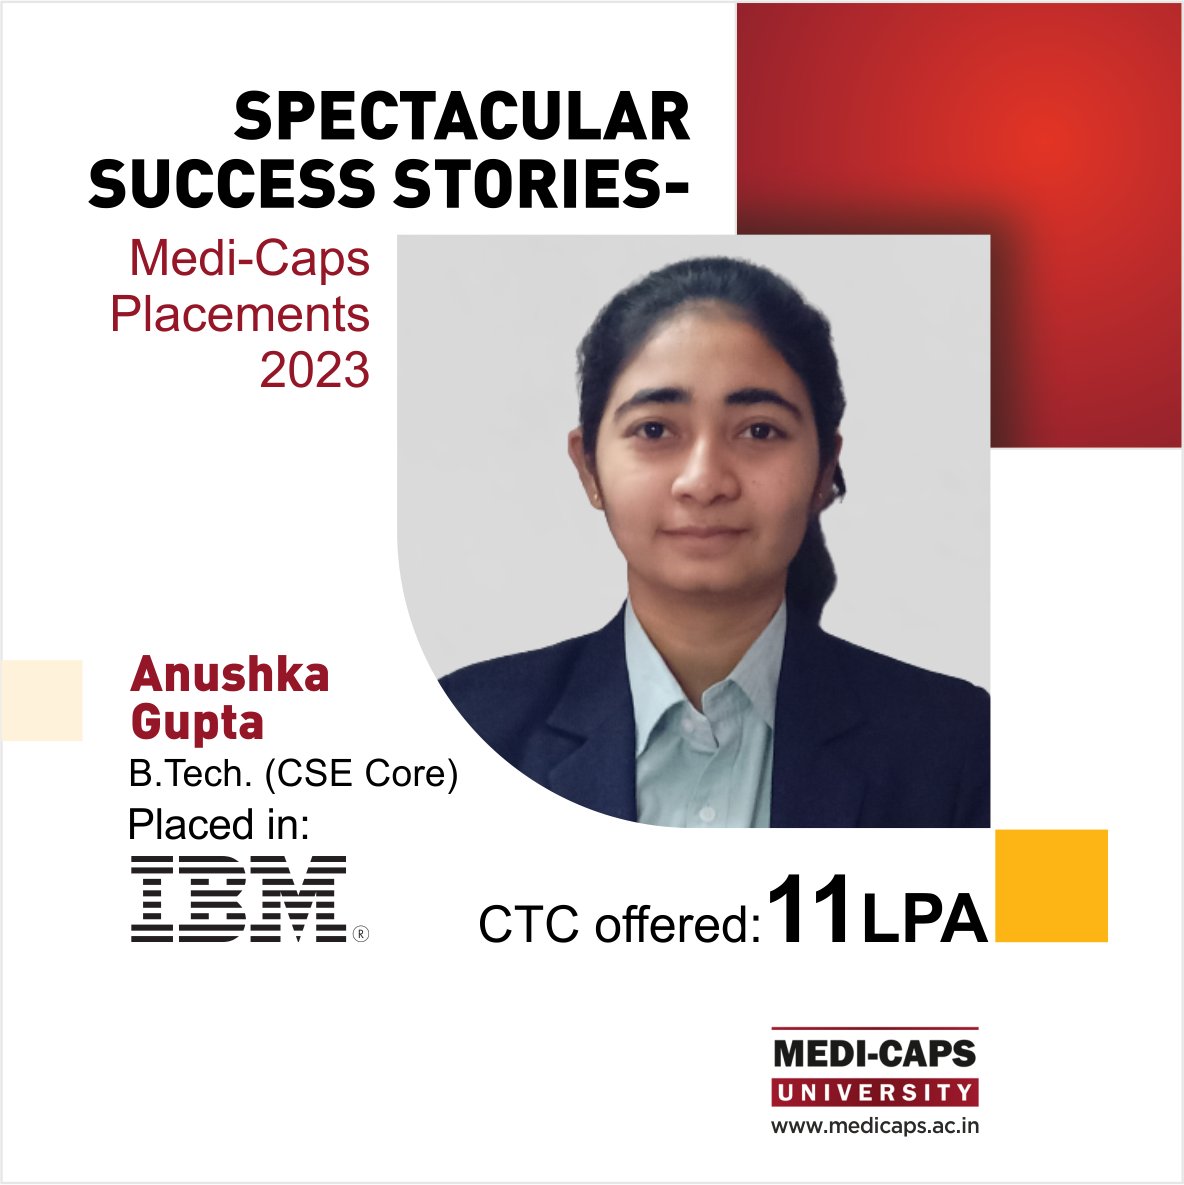 Heartiest congratulations on the stupendous accomplishment. Wishing you more success in the future.
__
#MediCapsUniversity #MediCaps #TopUniversity #BeLimitless #MU #MUPlacements #BTech #Placements #Placements2023 #IBM